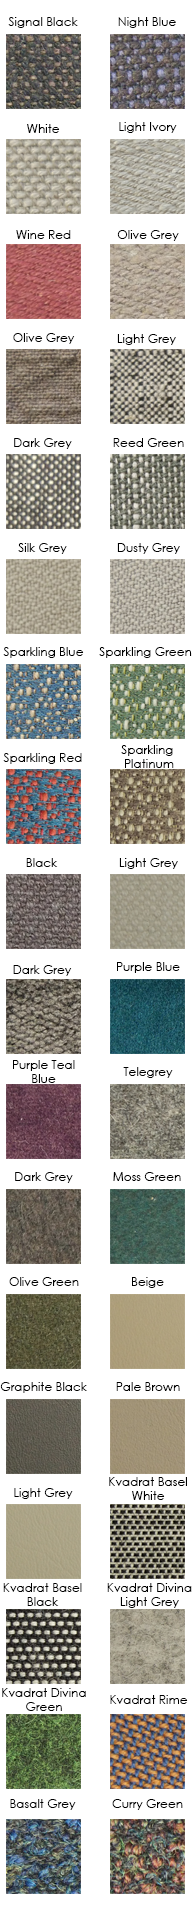 Upholstery Options